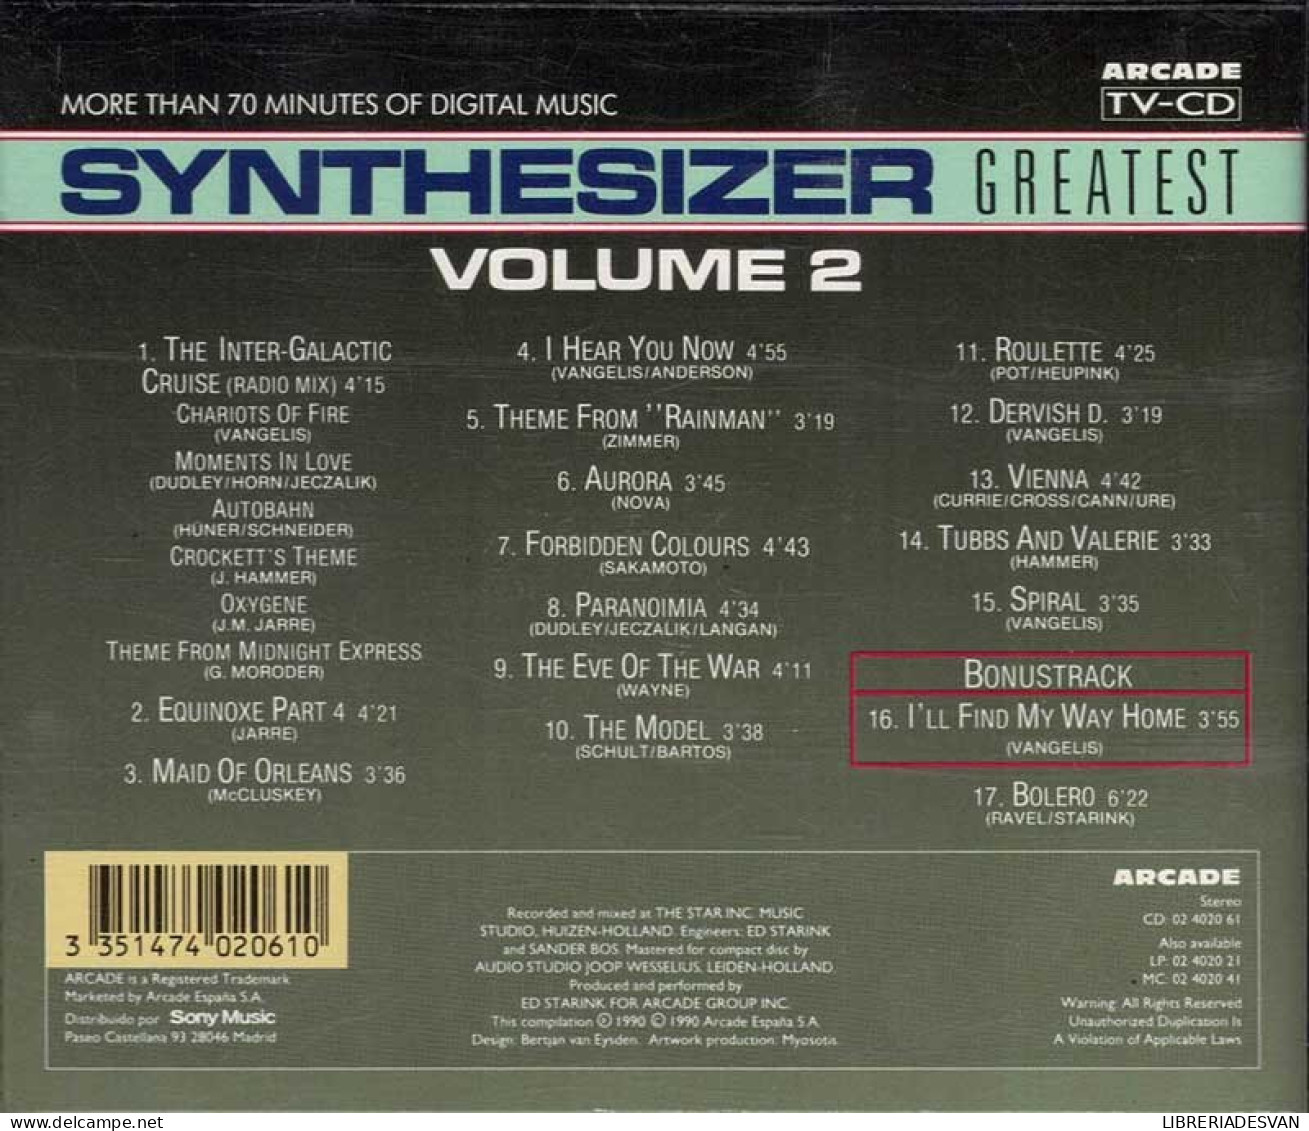 Synthesizer Greatest Volume 2. CD - New Age